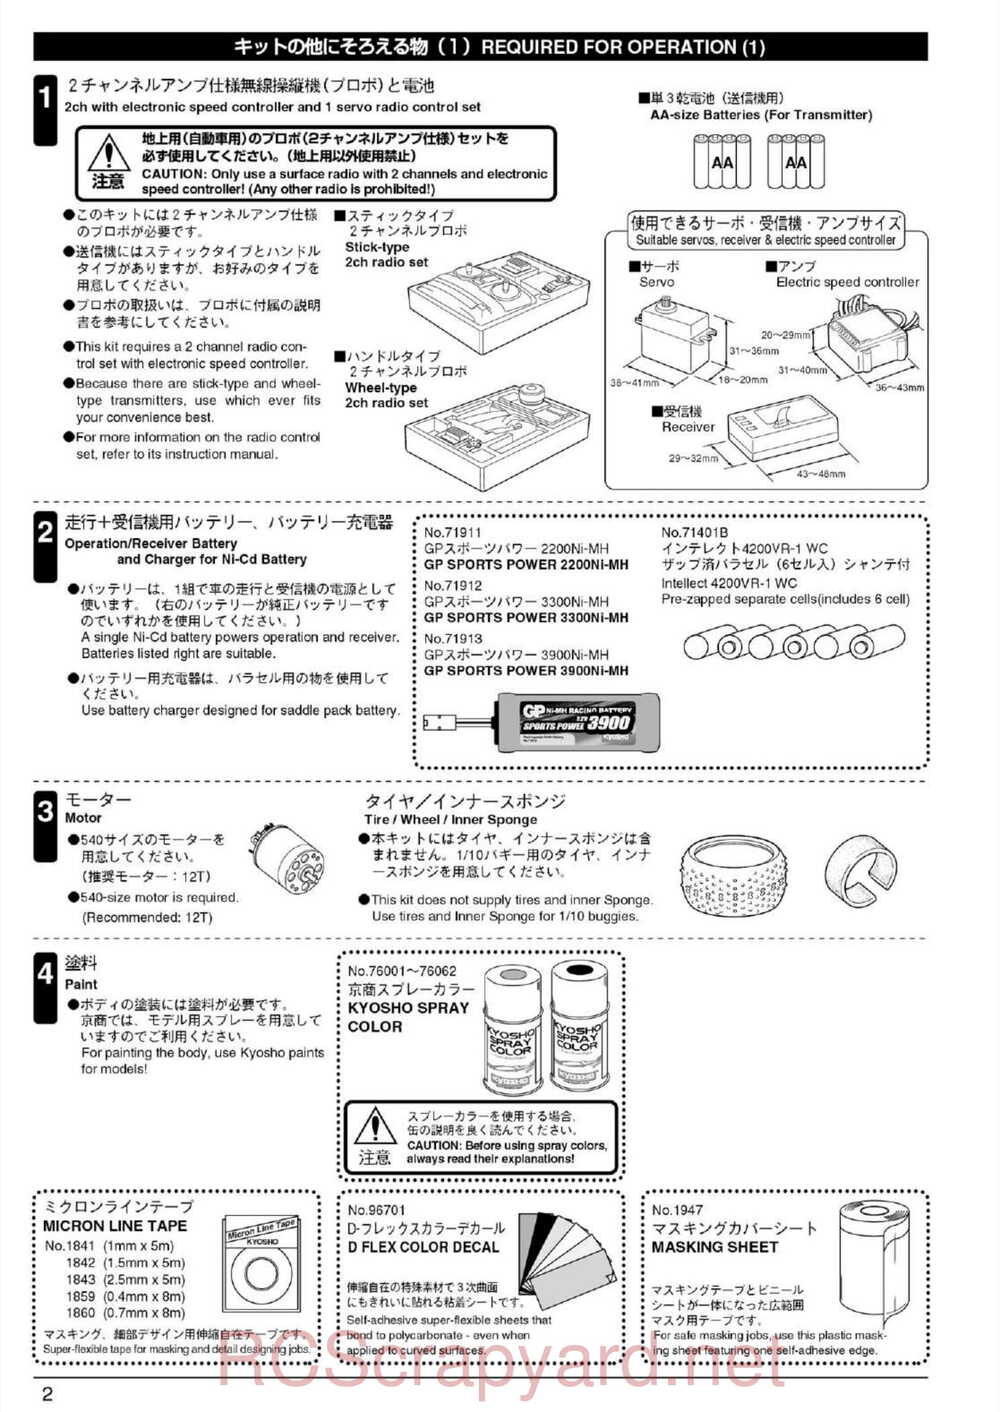 Kyosho - 30074 - Ultima-RB5 - Manual - Page 02